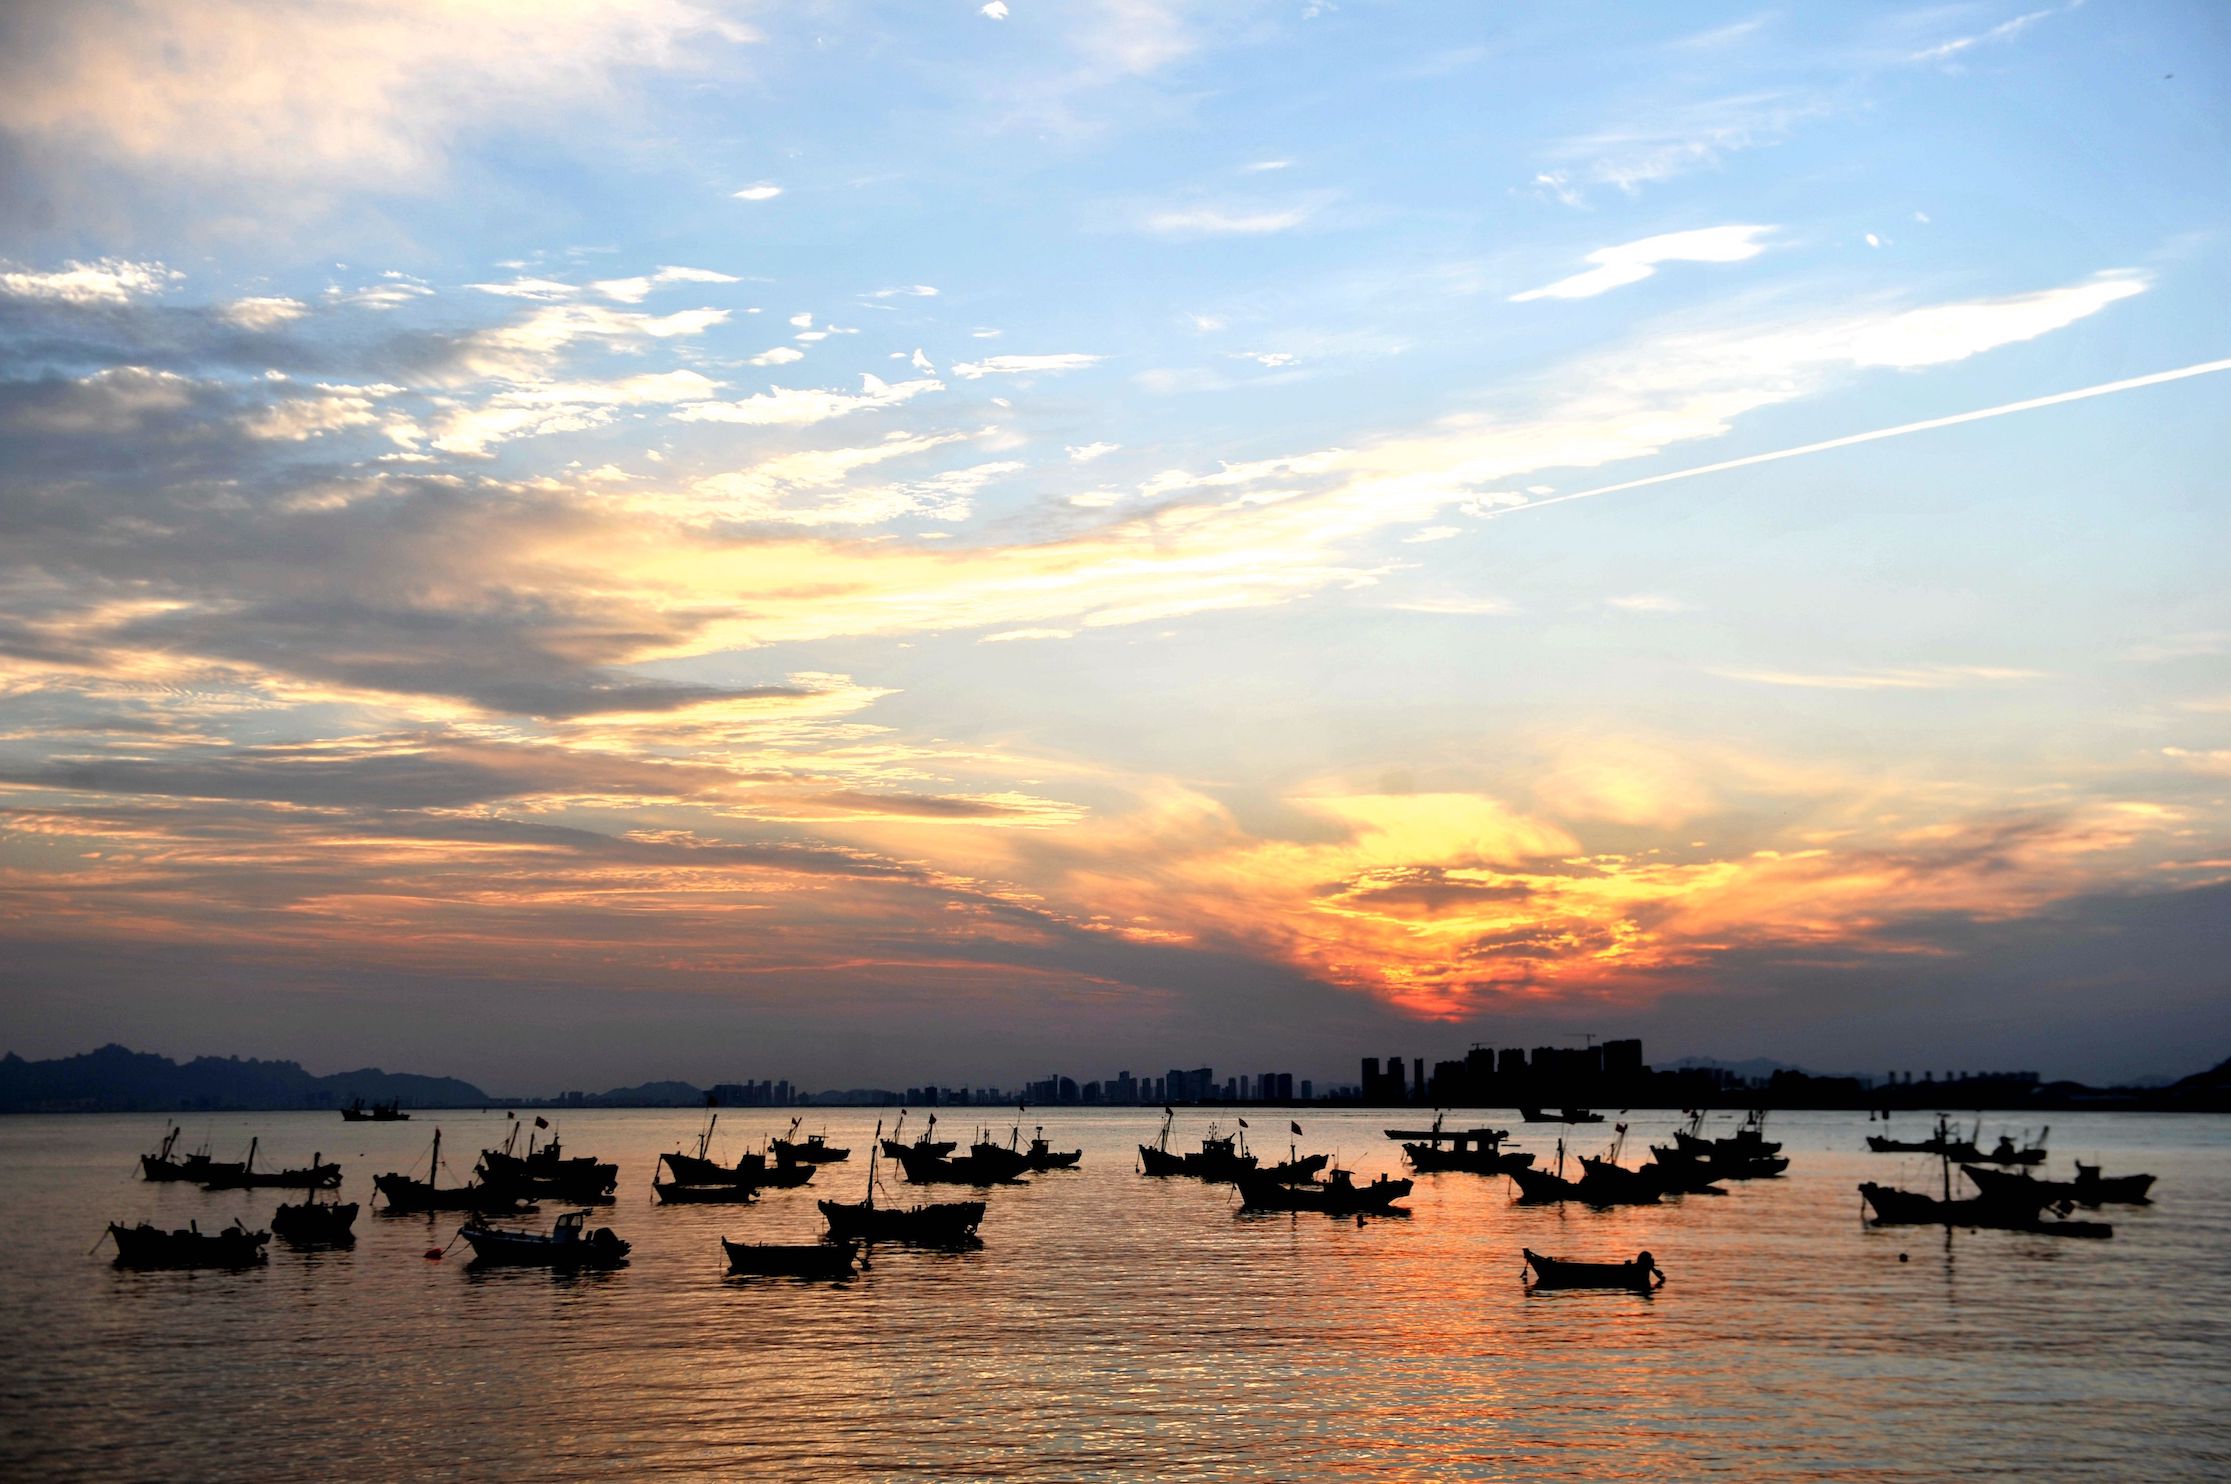 Returning fishing boats moor under the sunset in Qingdao, Shandong Province, China